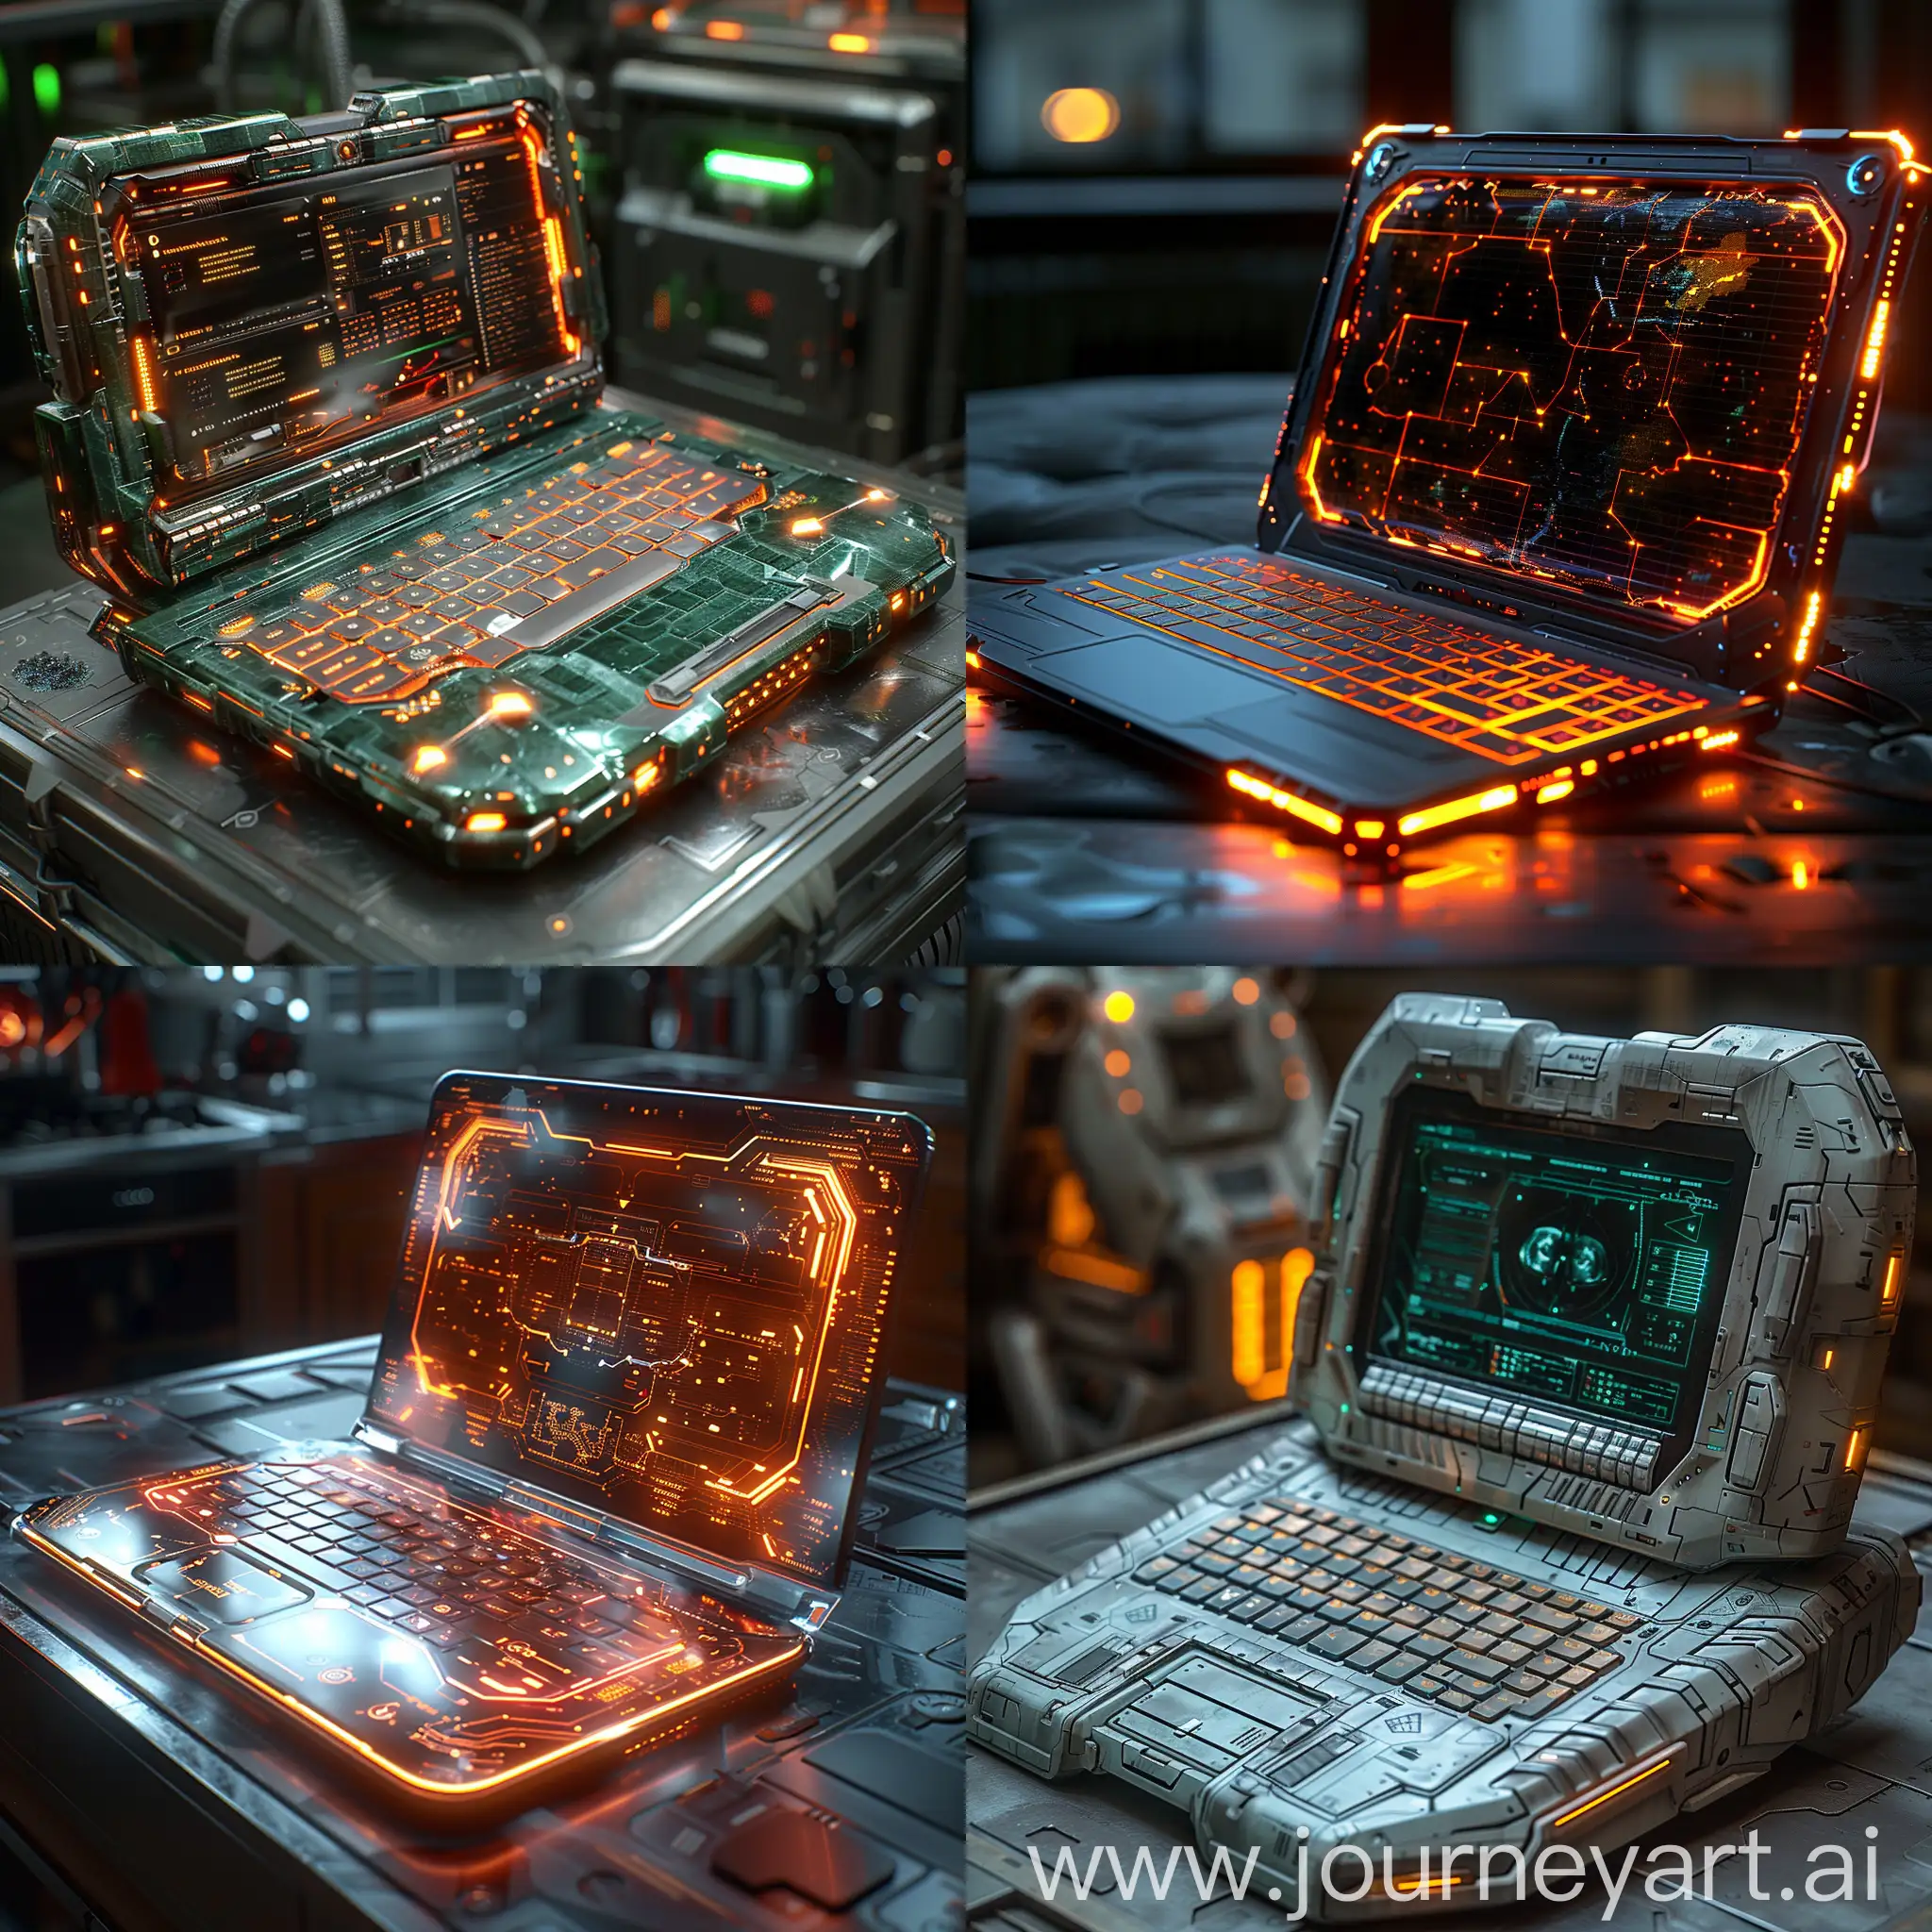 Futuristic-Nanotech-Laptop-with-Biodegradable-Materials-and-Holographic-Display